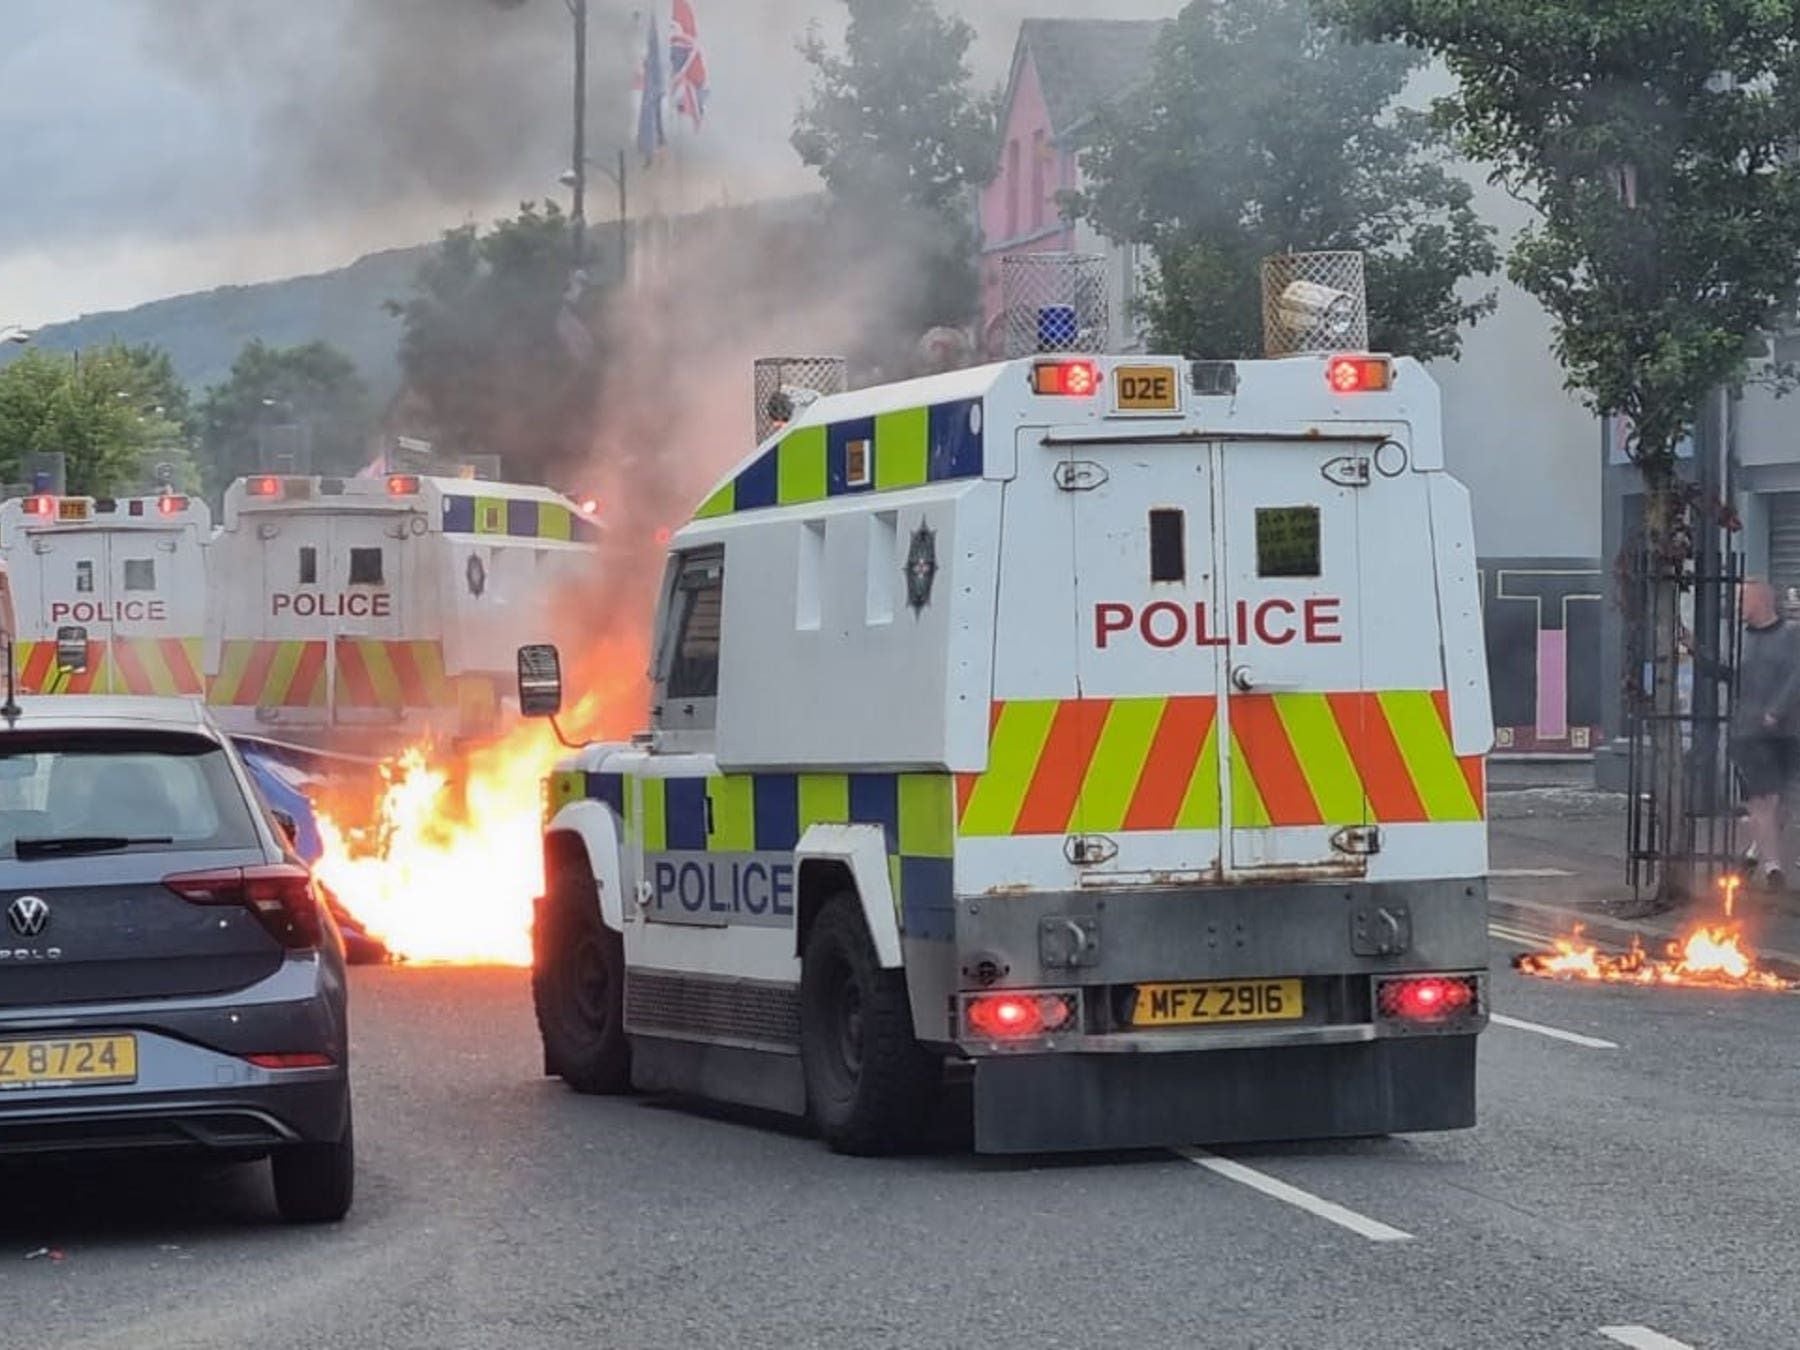 Business and cars set on fire as fresh violence breaks out in Belfast